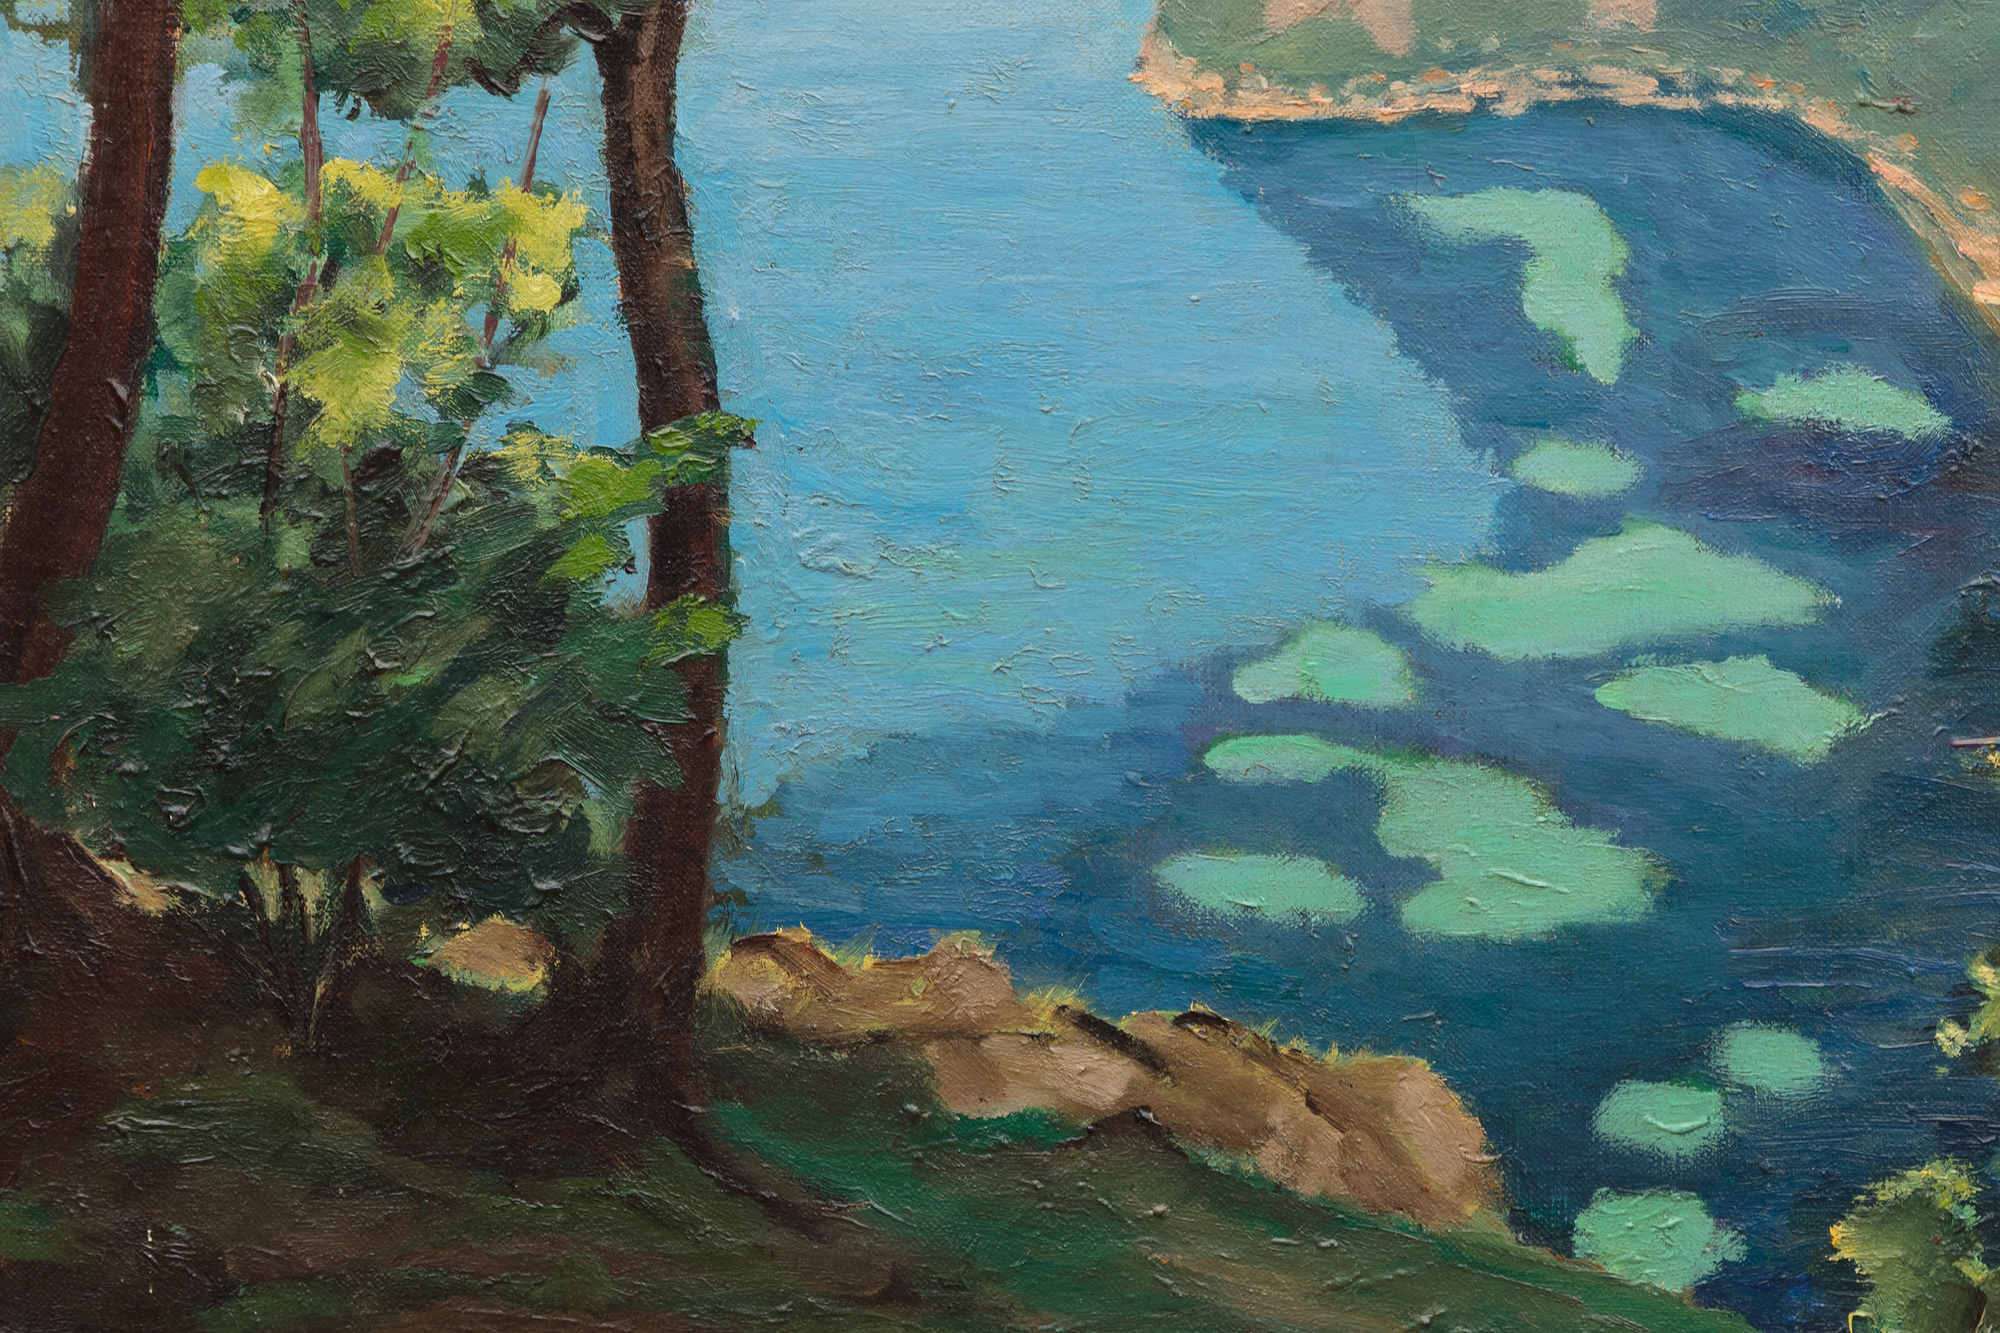 Located on the French Riviera between Nice and Monte Carlo, the Bay of Eze is renowned for its stunning location and spectacular views. As you can see on pages 80-81 of Rafferty&#039;s book, this painting skillfully captures the dizzying heights, set just west of Lou Sueil, the home of Jacques and Consuelo Balsan, close friends of Winston and Clementine.&lt;br&gt; &lt;br&gt;The painting manipulates perspective and depth, a nod to the dramatic shifts of artists including Monet and Cézanne, who challenged traditional vantage points of landscapes. The portrait (i.e. vertical) orientation of the canvas combined with the trees, and the rhyming coastline channels the viewer’s gaze. The perceived tilting of the water&#039;s plane imbues the painting with dynamic tension.